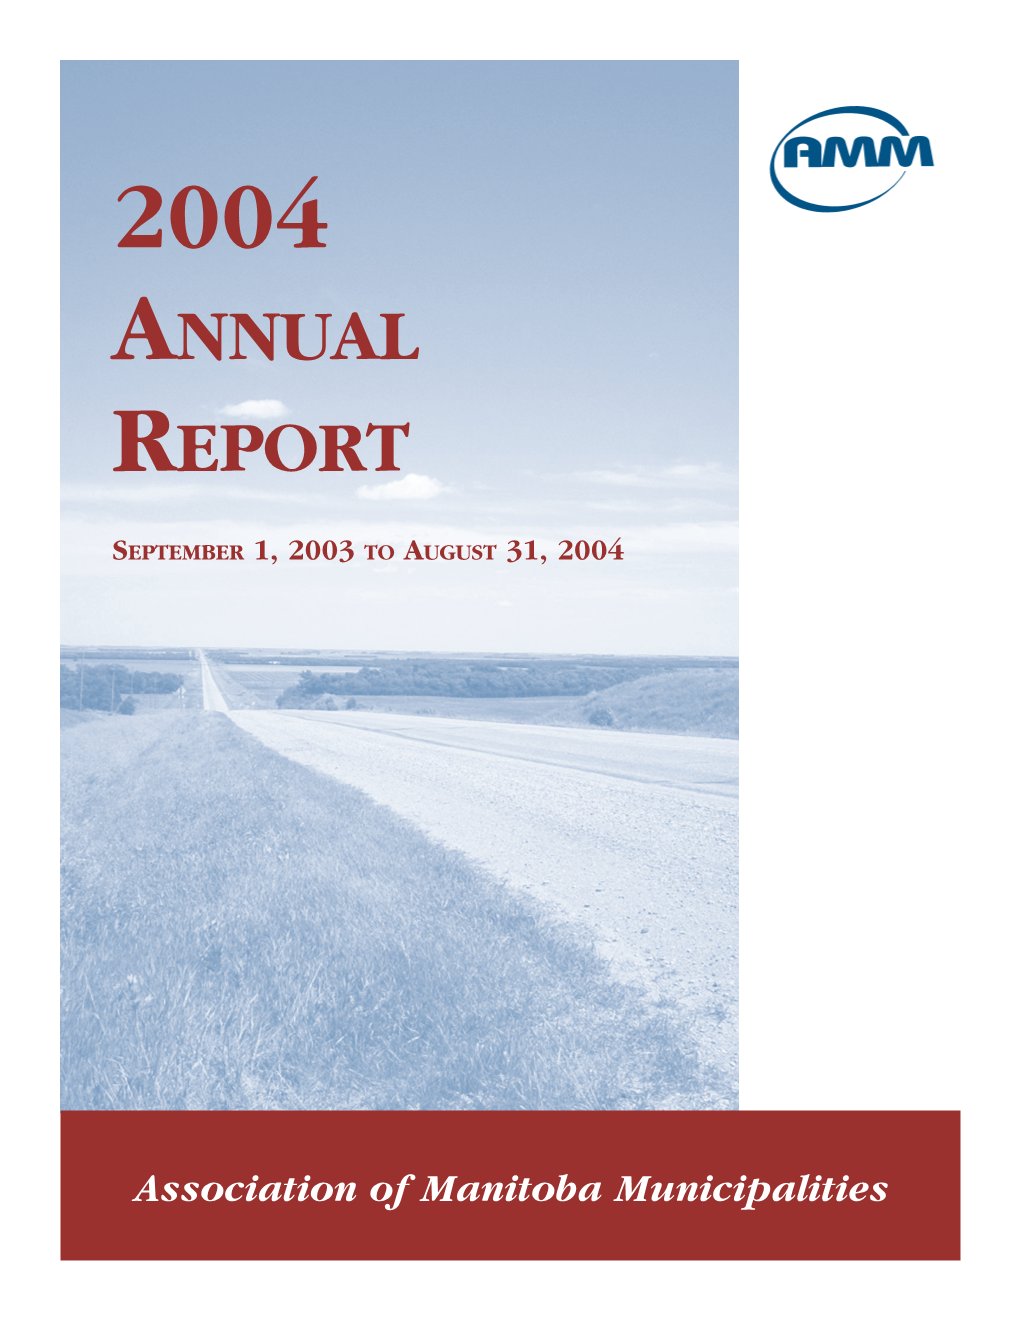 2004 Amm Annual Report 2